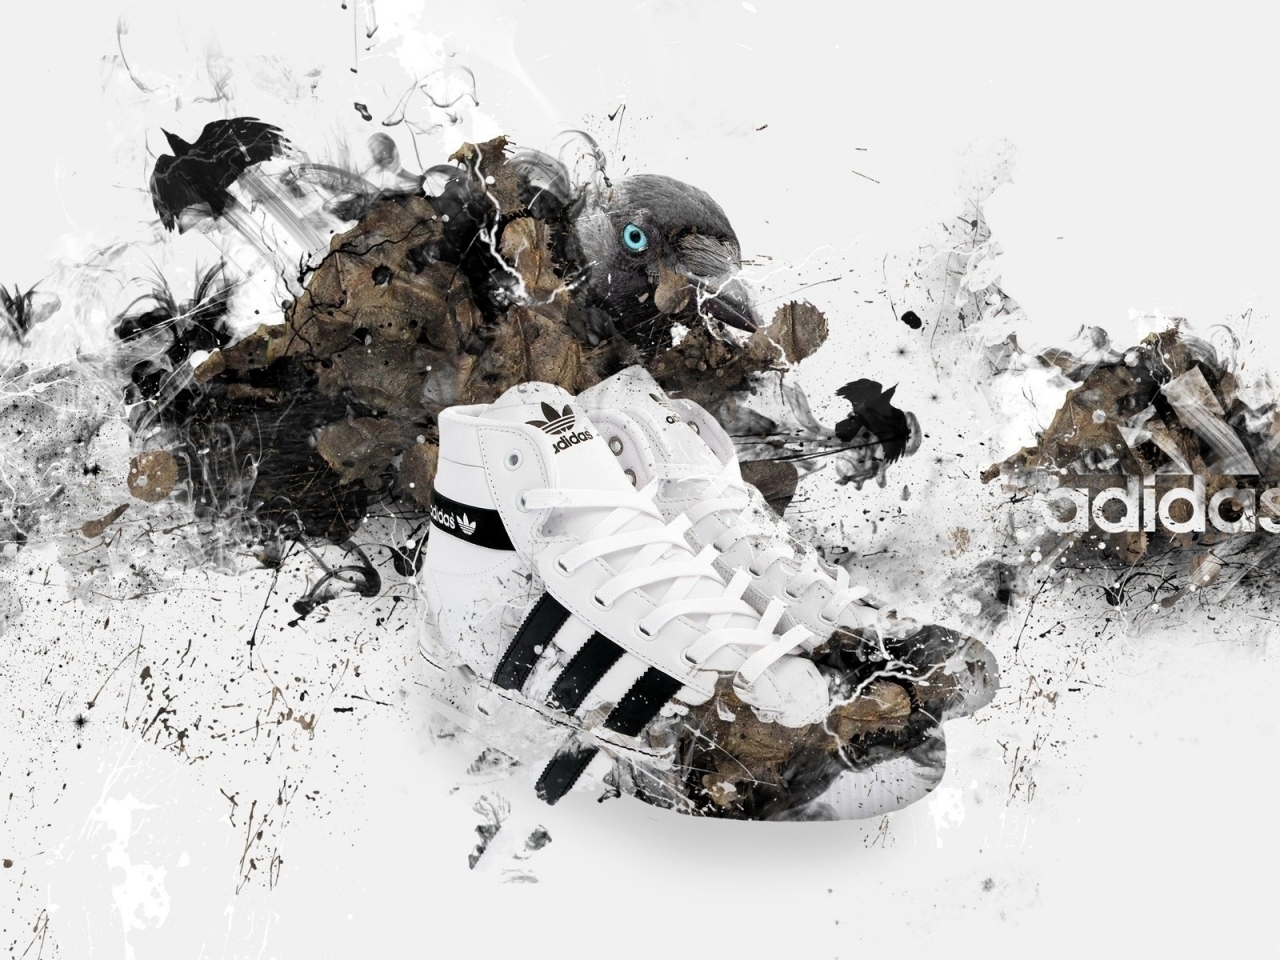 Adidas Shoes for 1280 x 960 resolution